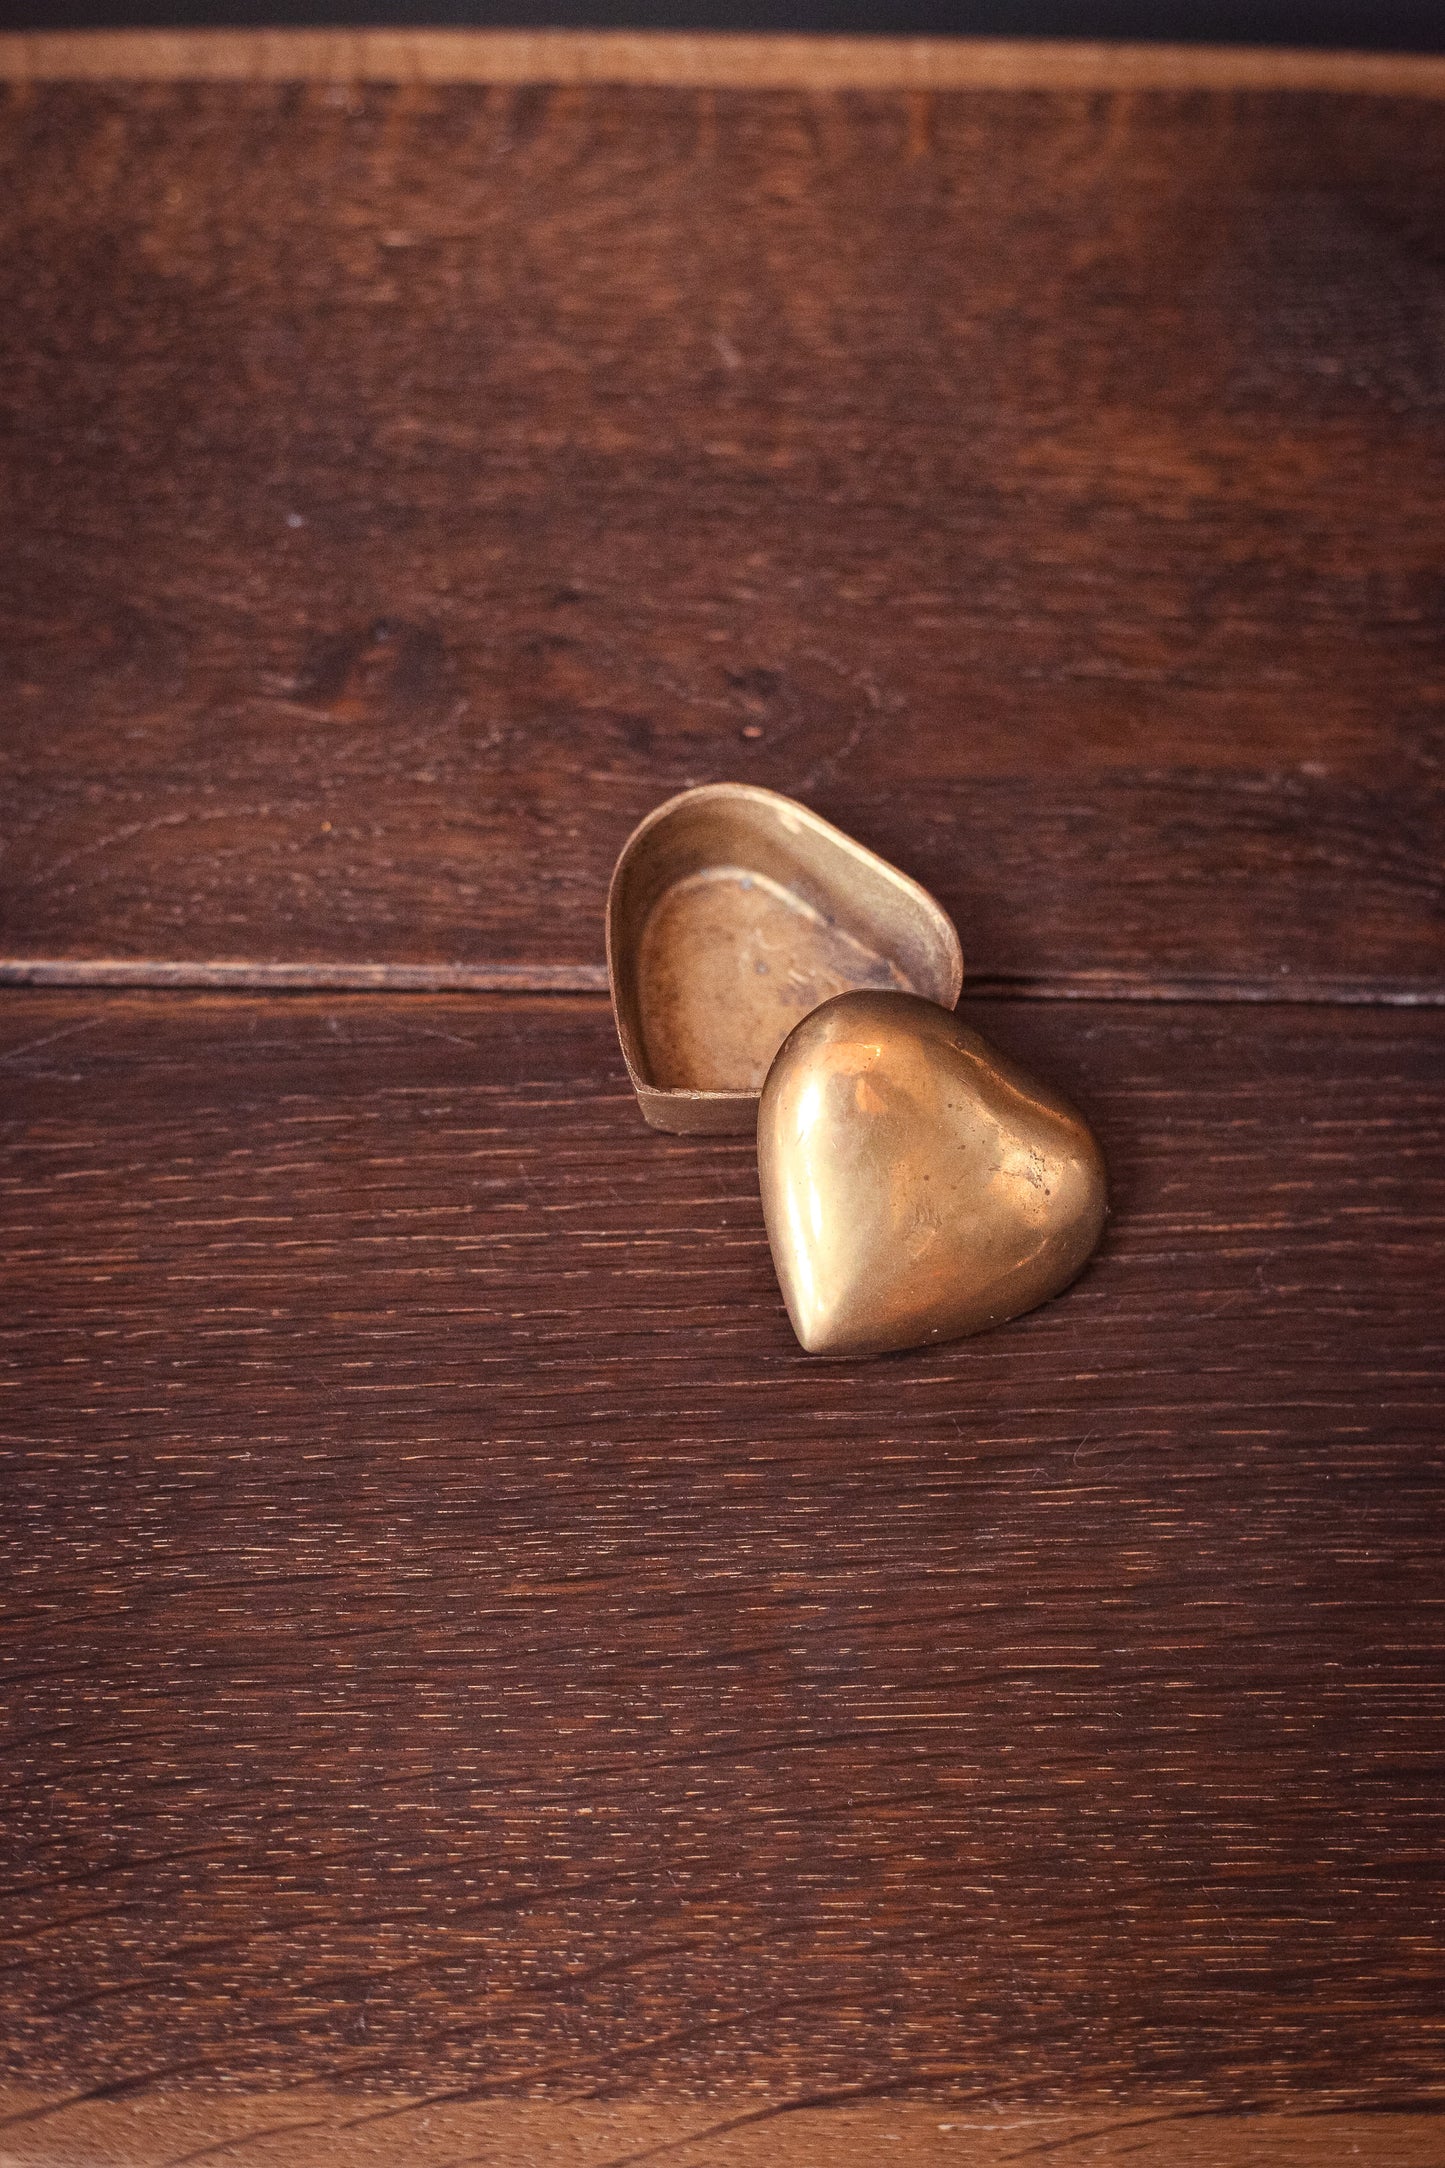 Small Brass Heart Shaped Ring Dish with Lid - Heart Shaped Jewelry Storage